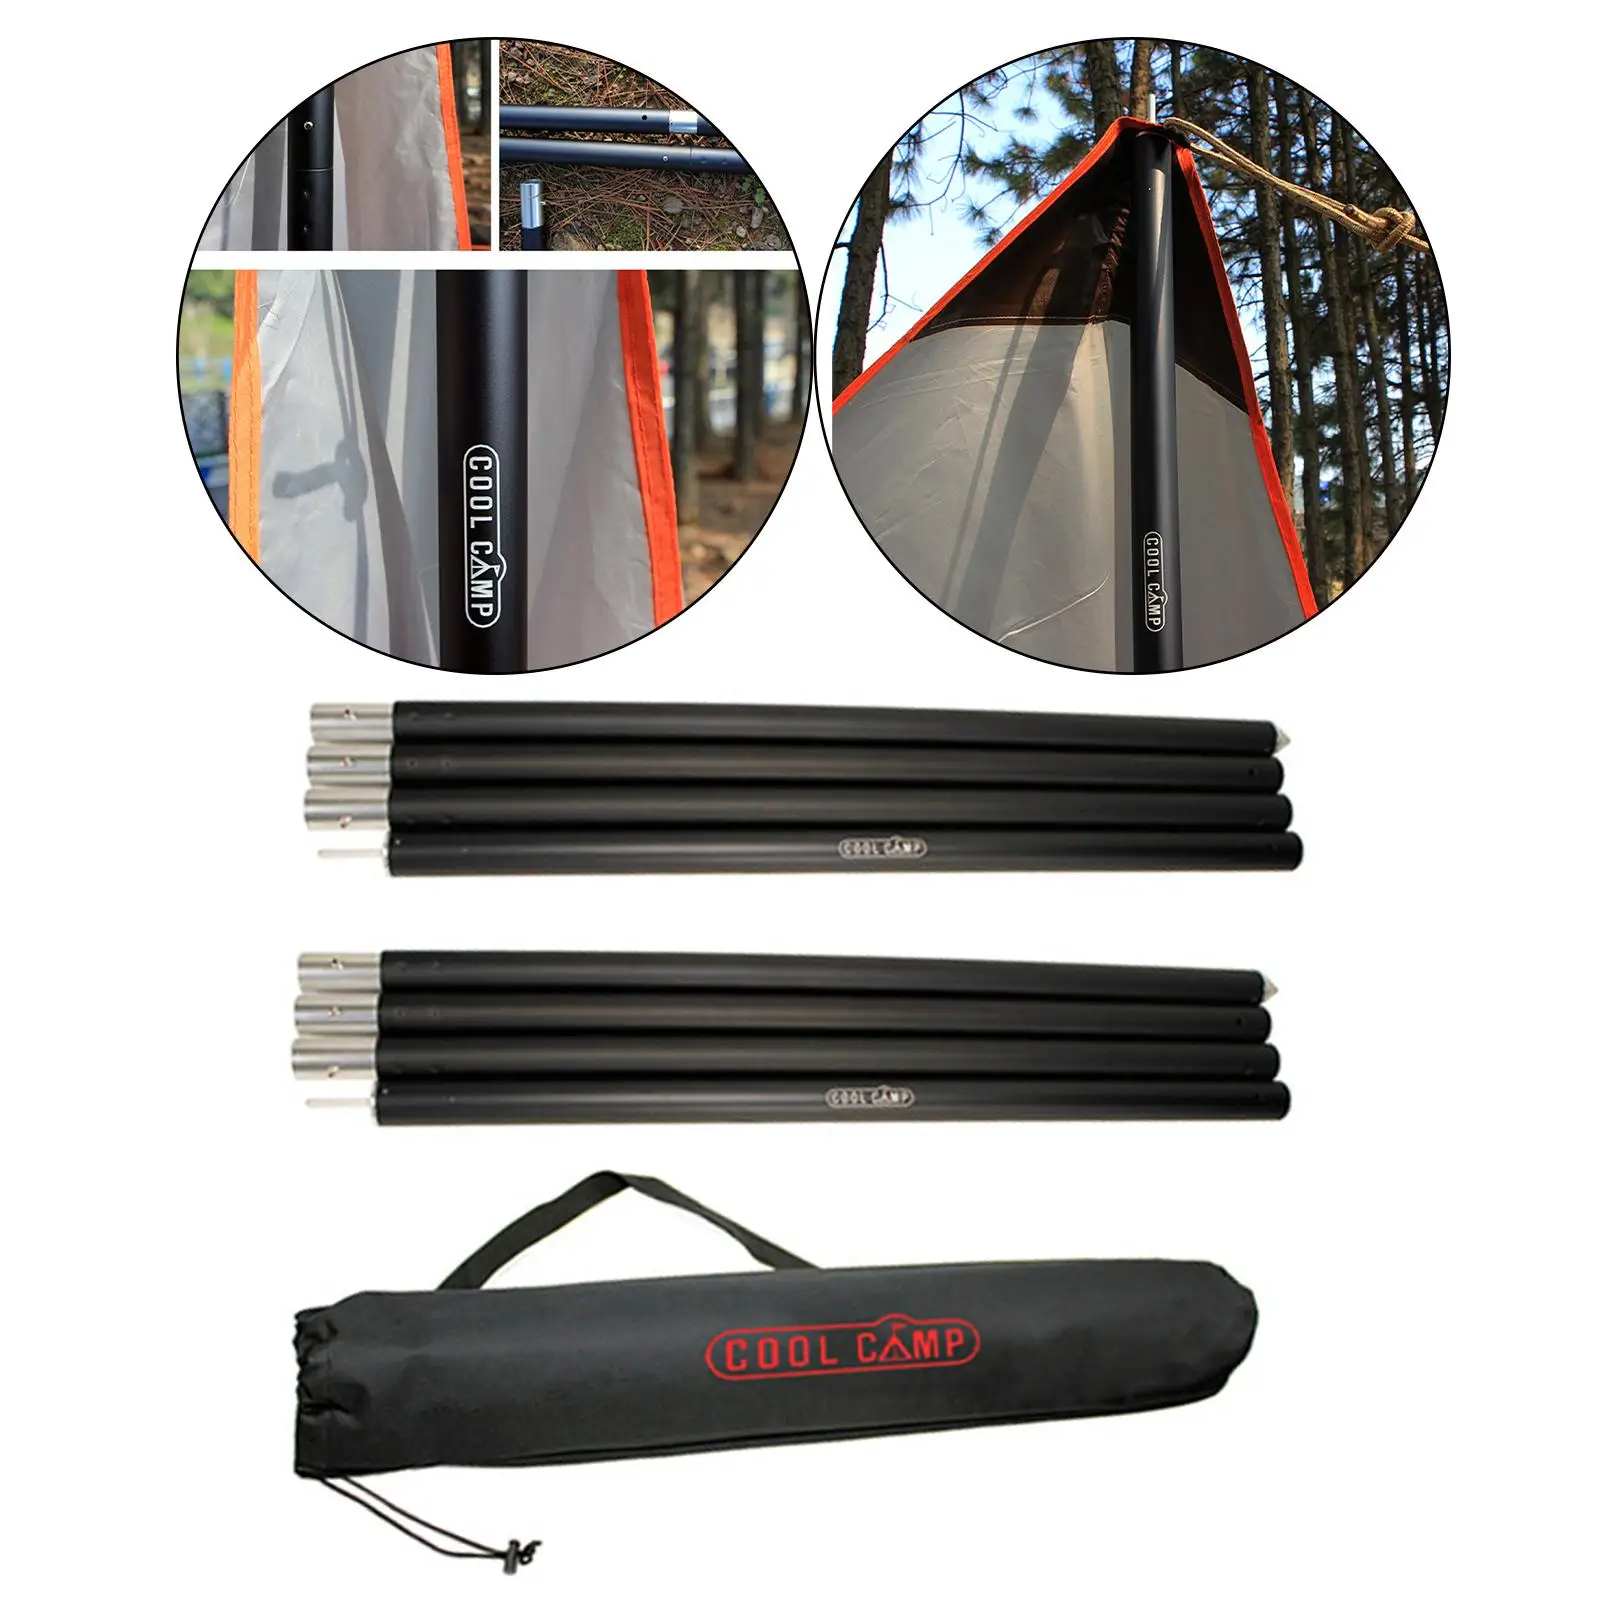 280cm Aluminum Tent Tarp Rod Assembled  for Camping, Awnings,Shelters Versatile Collapsible Easy to Install Multifunction